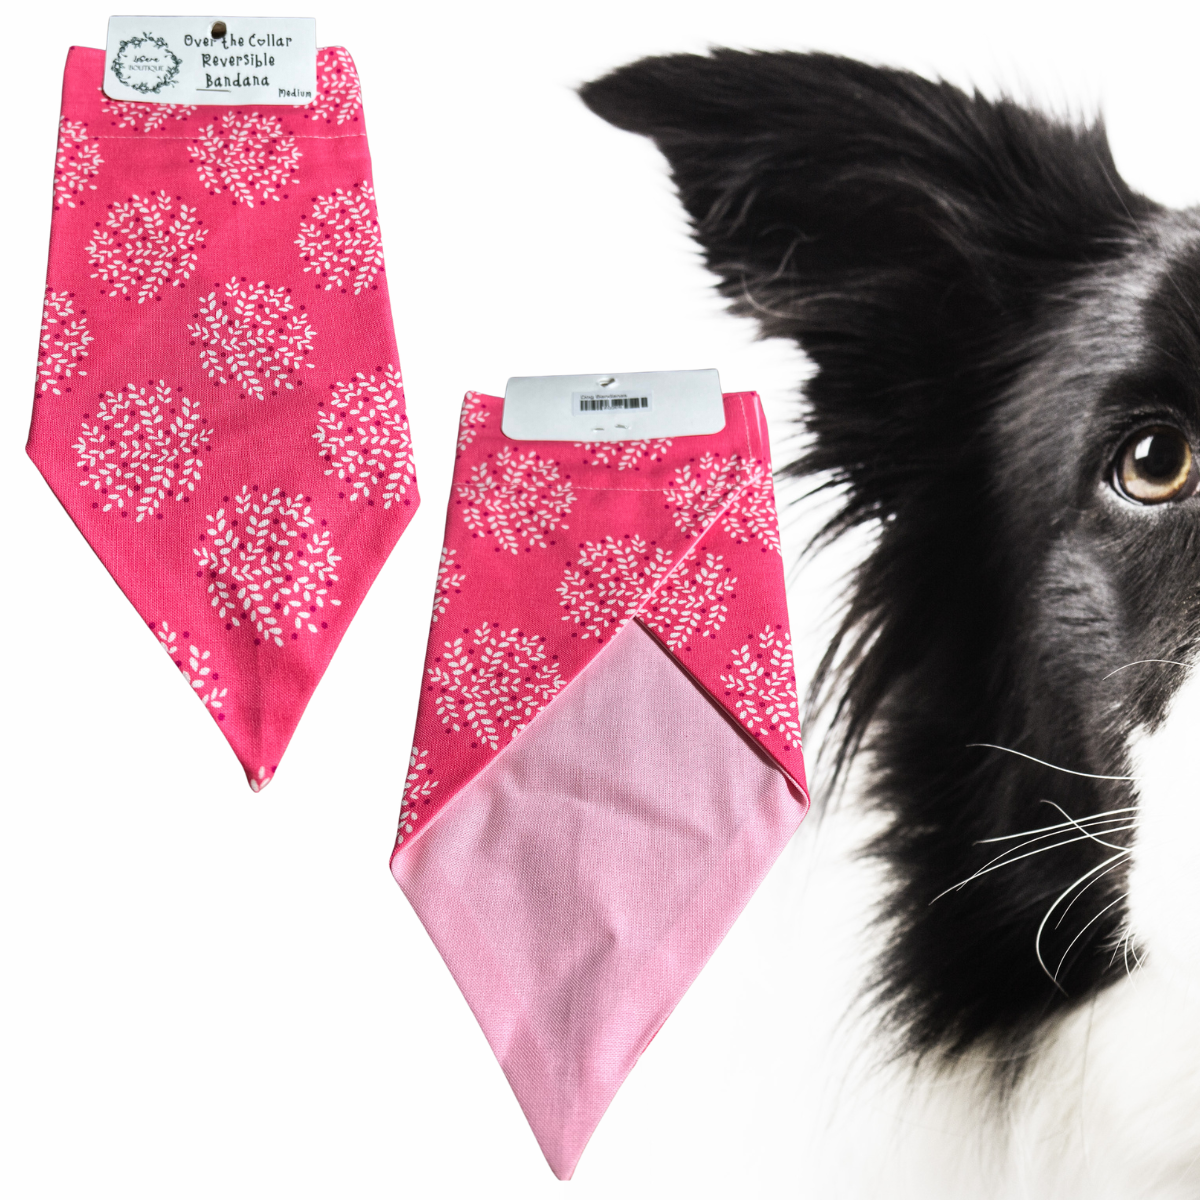 Medium Reversible Over-the-Collar Dog Bandana (11" Wide by 8.5" Long)